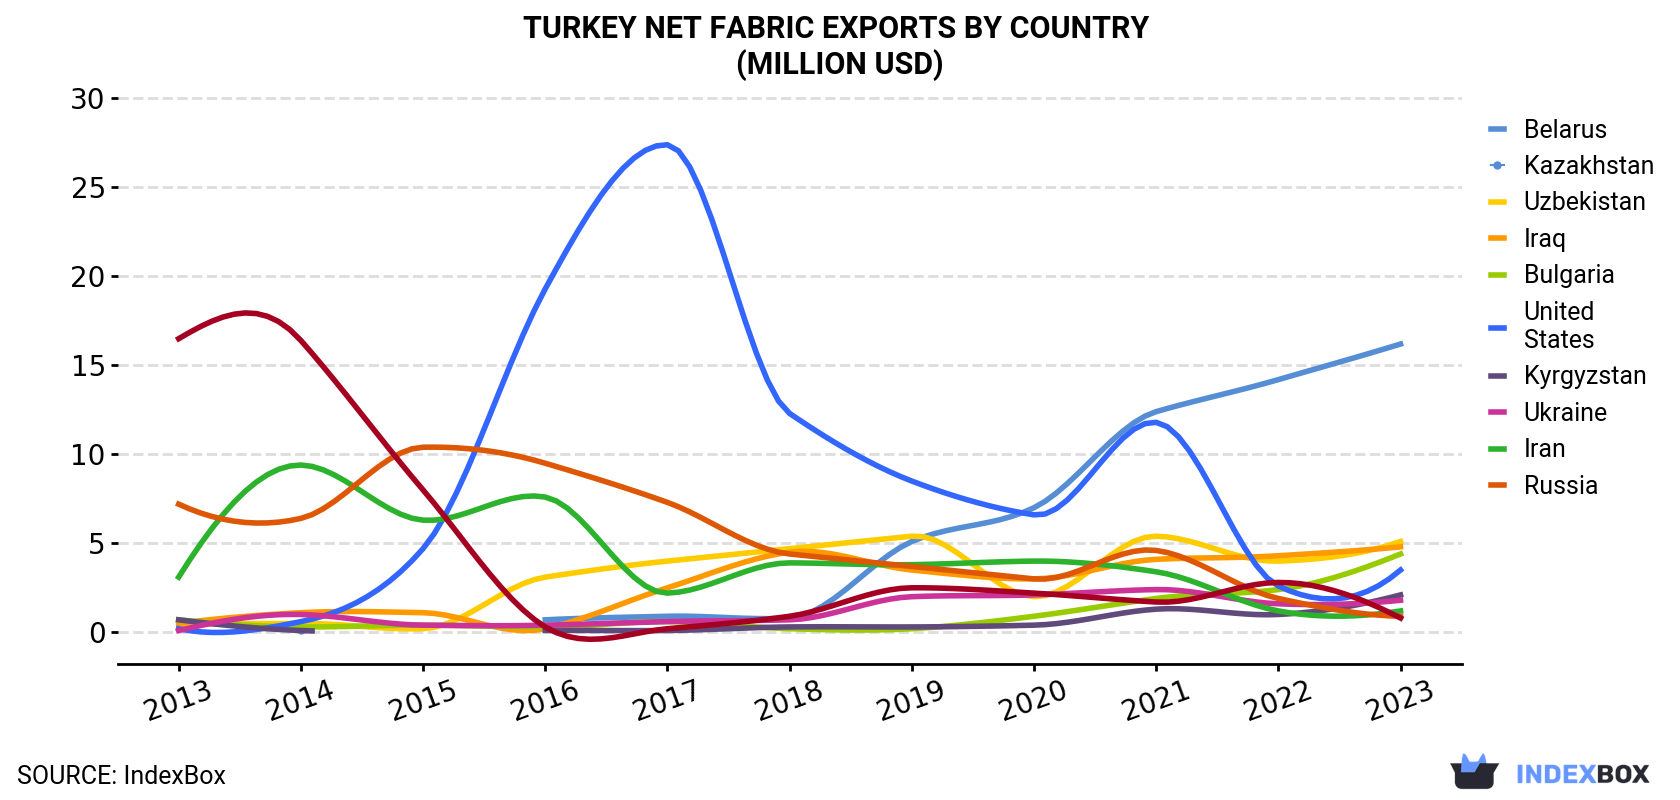 Turkey Net Fabric Exports By Country (Million USD)